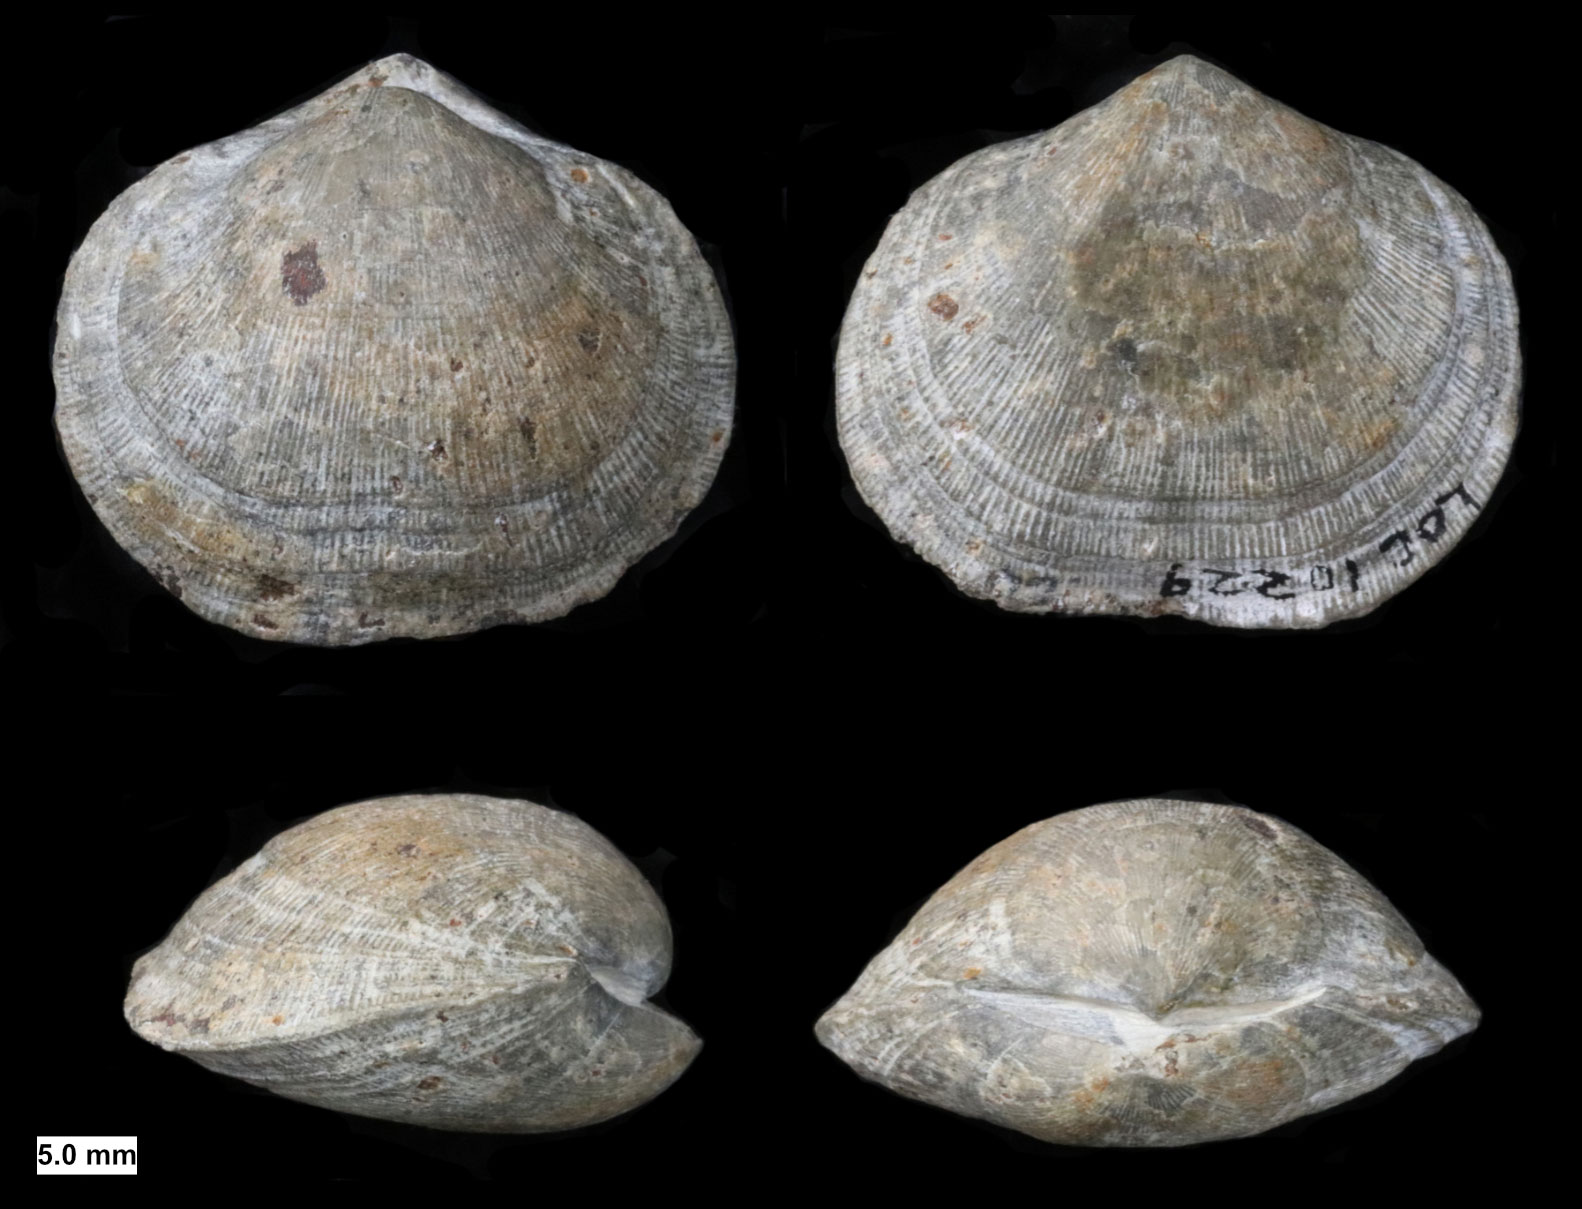 Photographs showing four views of a brachiopod from the Devonian of Wisconsin on a black background. Clockwise from upper left: View from above, view from below, view of the hinge, view from the side (hinge to the right). The shell is unornamented expect for a series of fine radiating ridges and furrows.